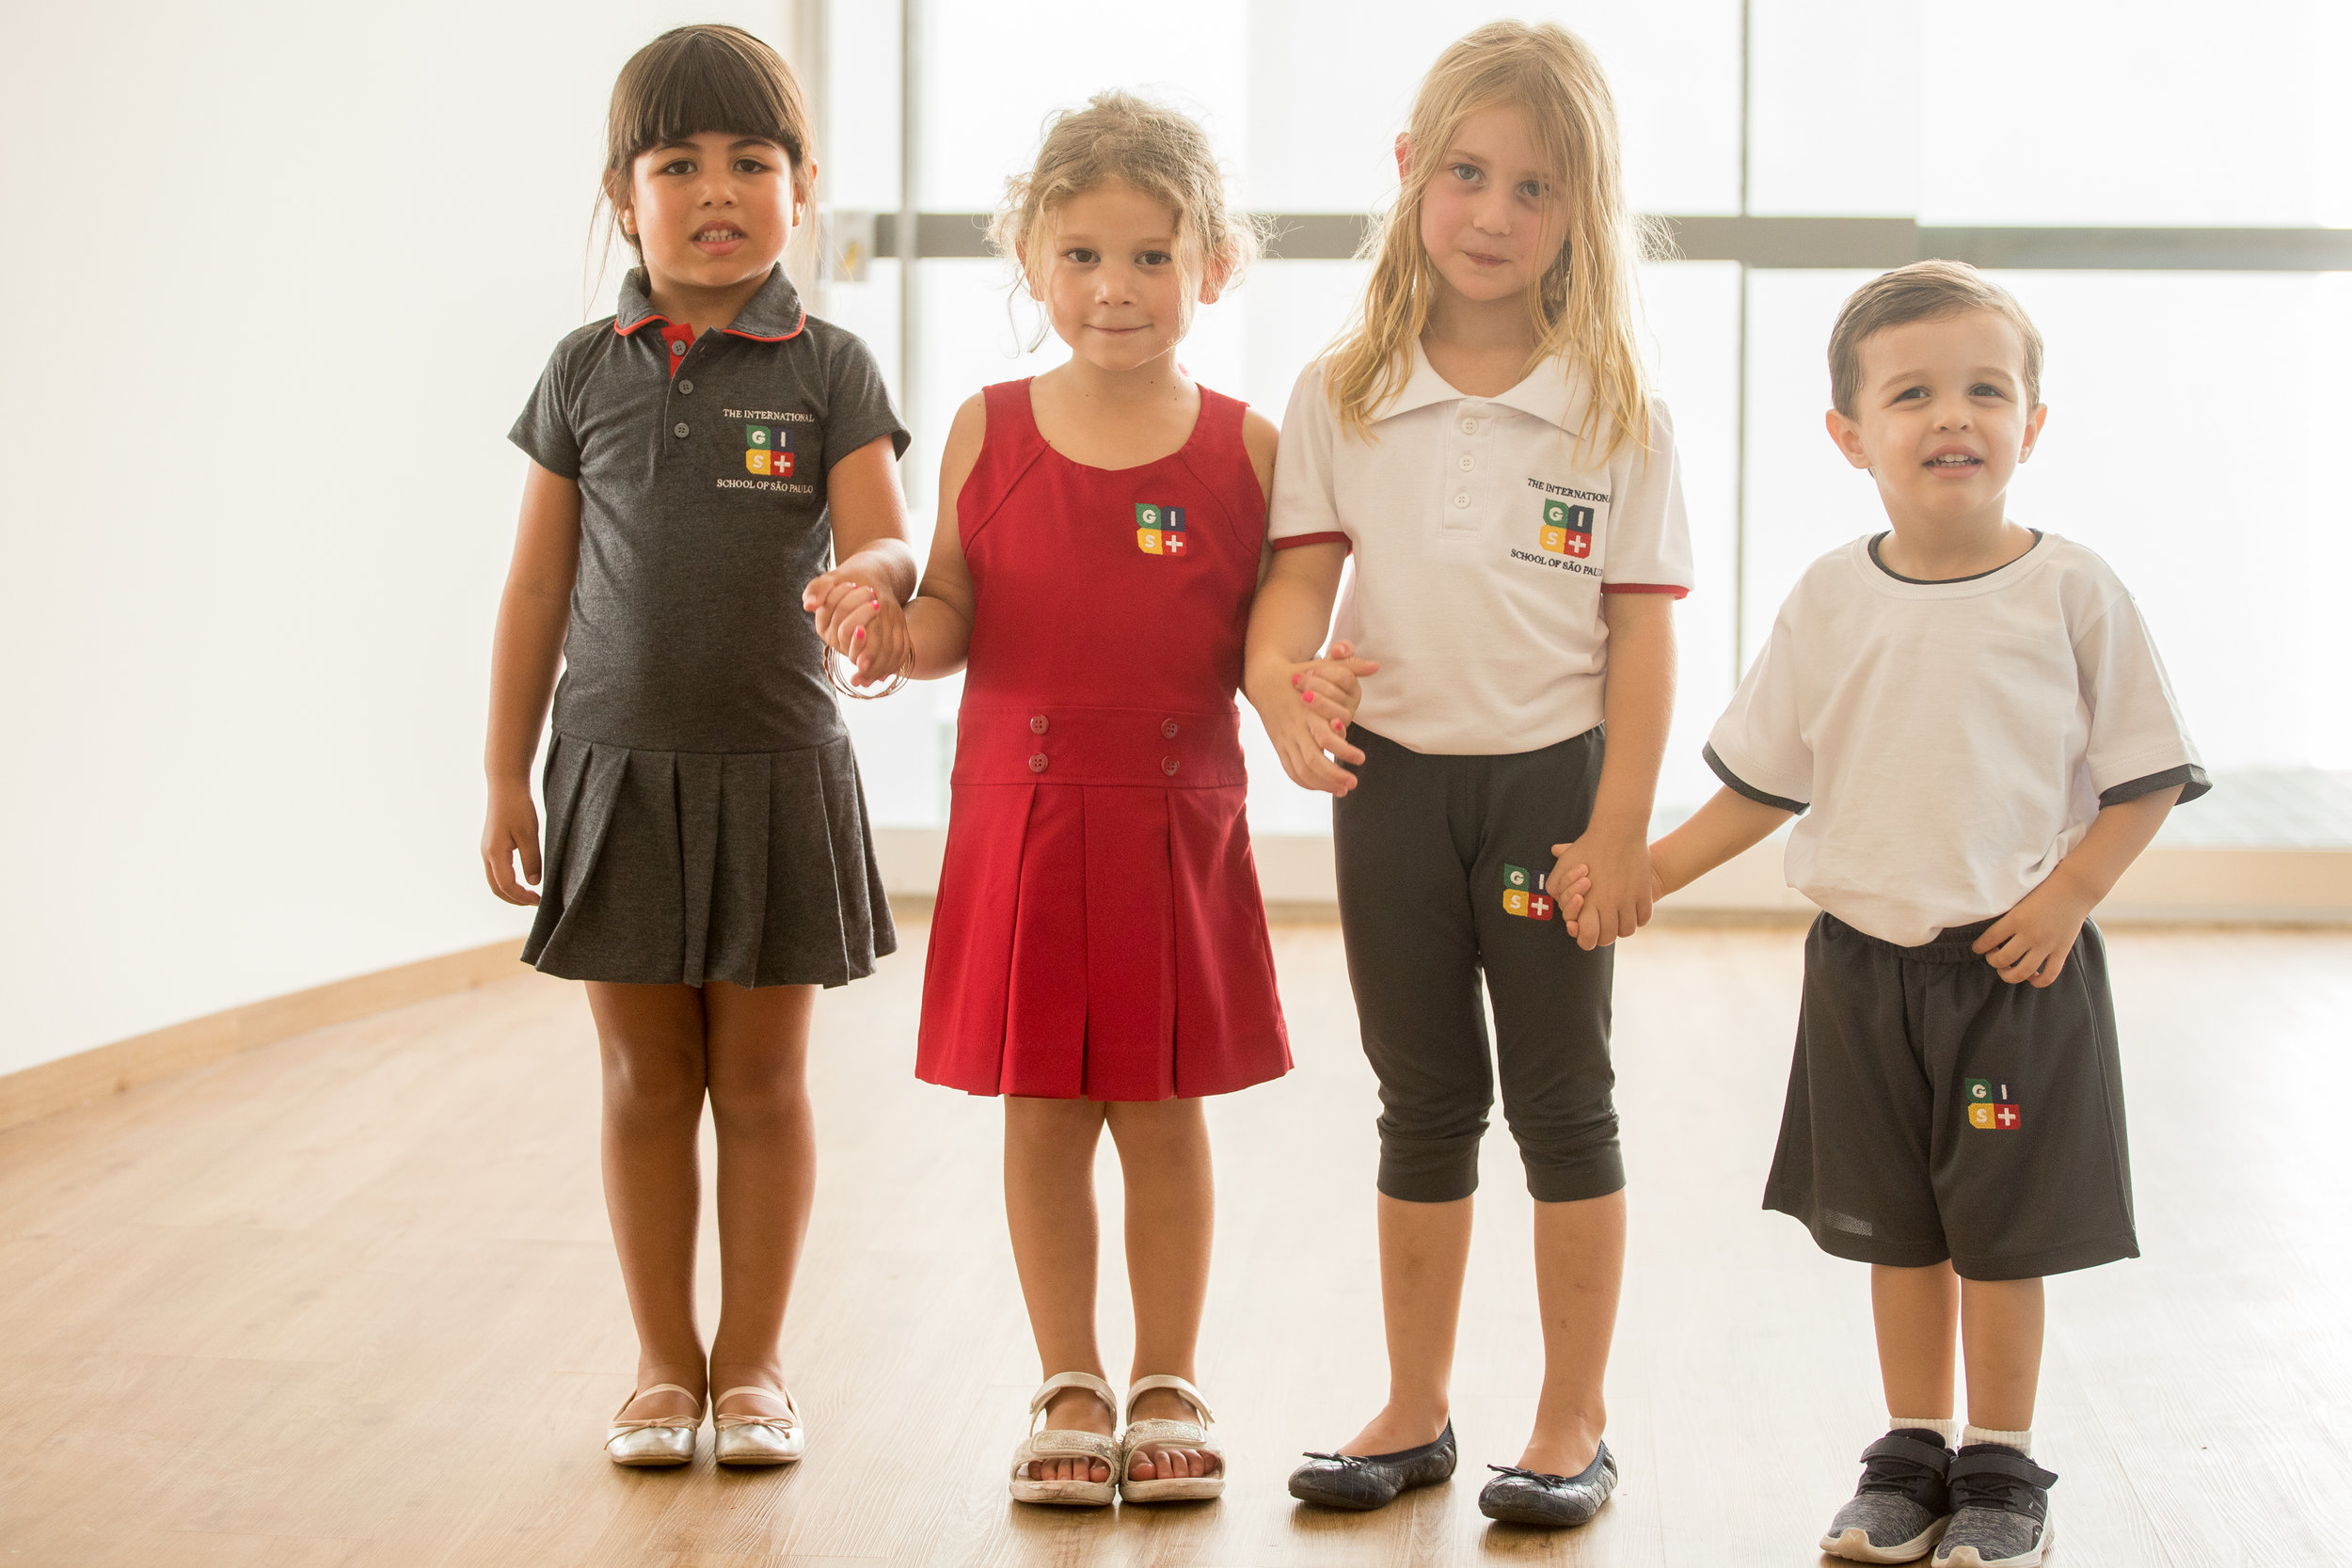 Students wear different models of the uniform: gray dress with polo collar and pleated skirt; red tank top dress; white polo shirt and gray capri pants; and white t-shirt and gray shorts.